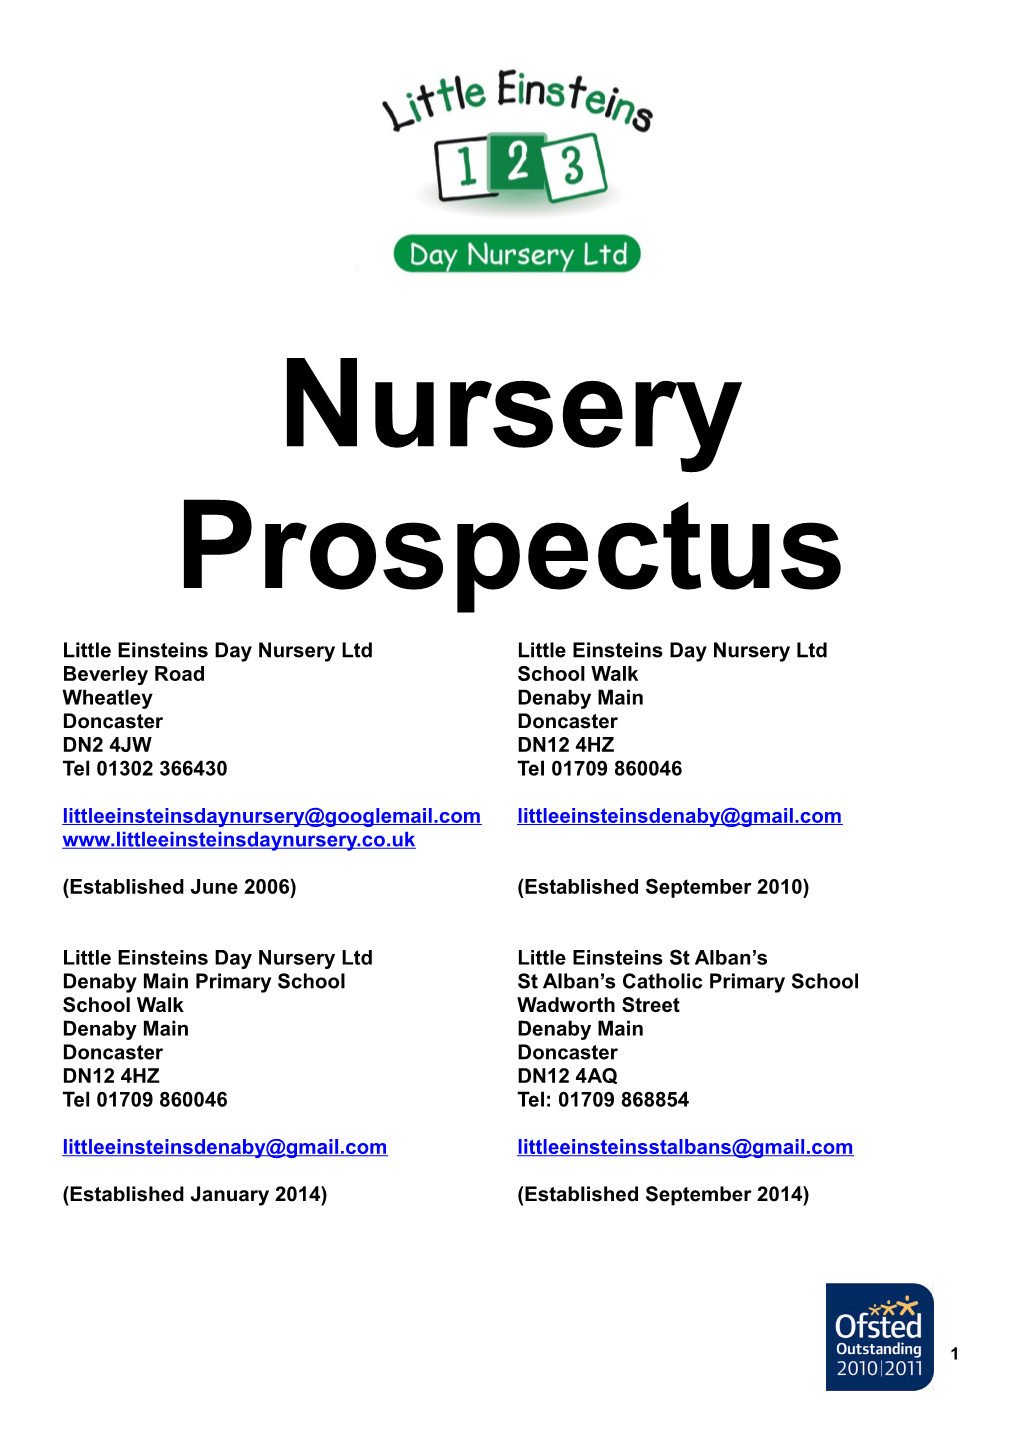 Welcome to Little Einsteins Day Nursery Where Our Aim Is to Provide High Quality Care And